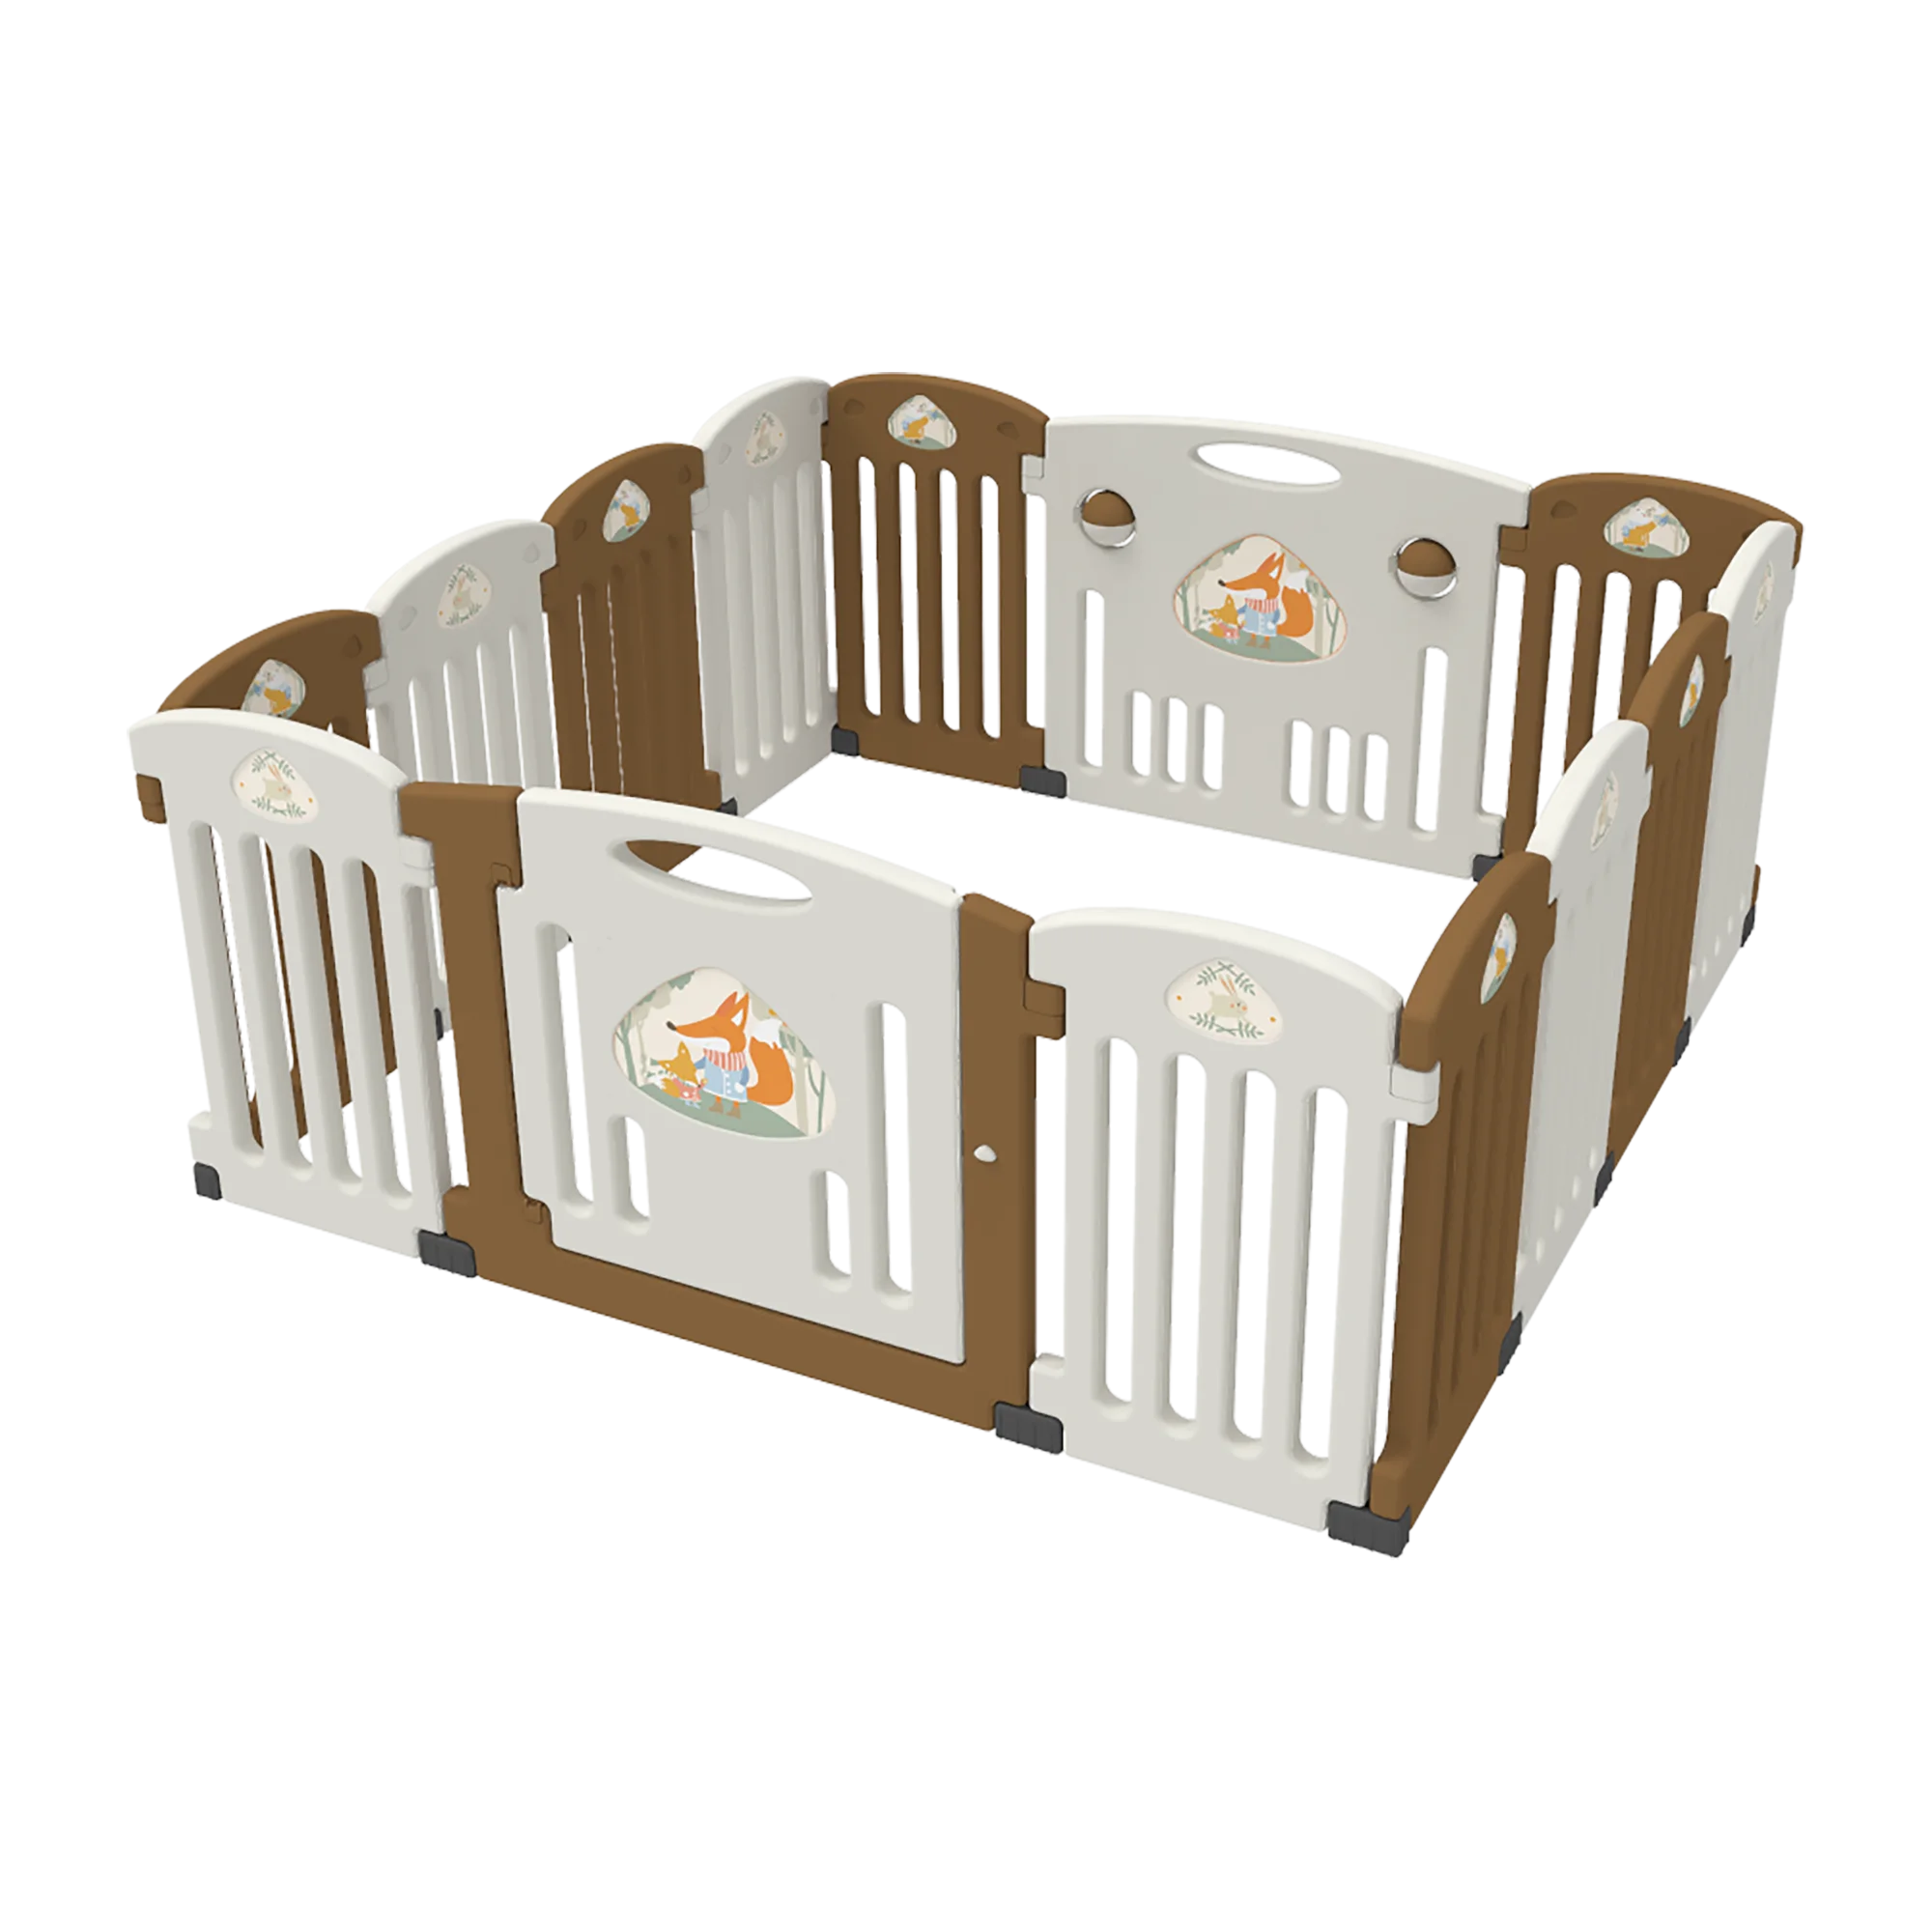 baby doll playpens